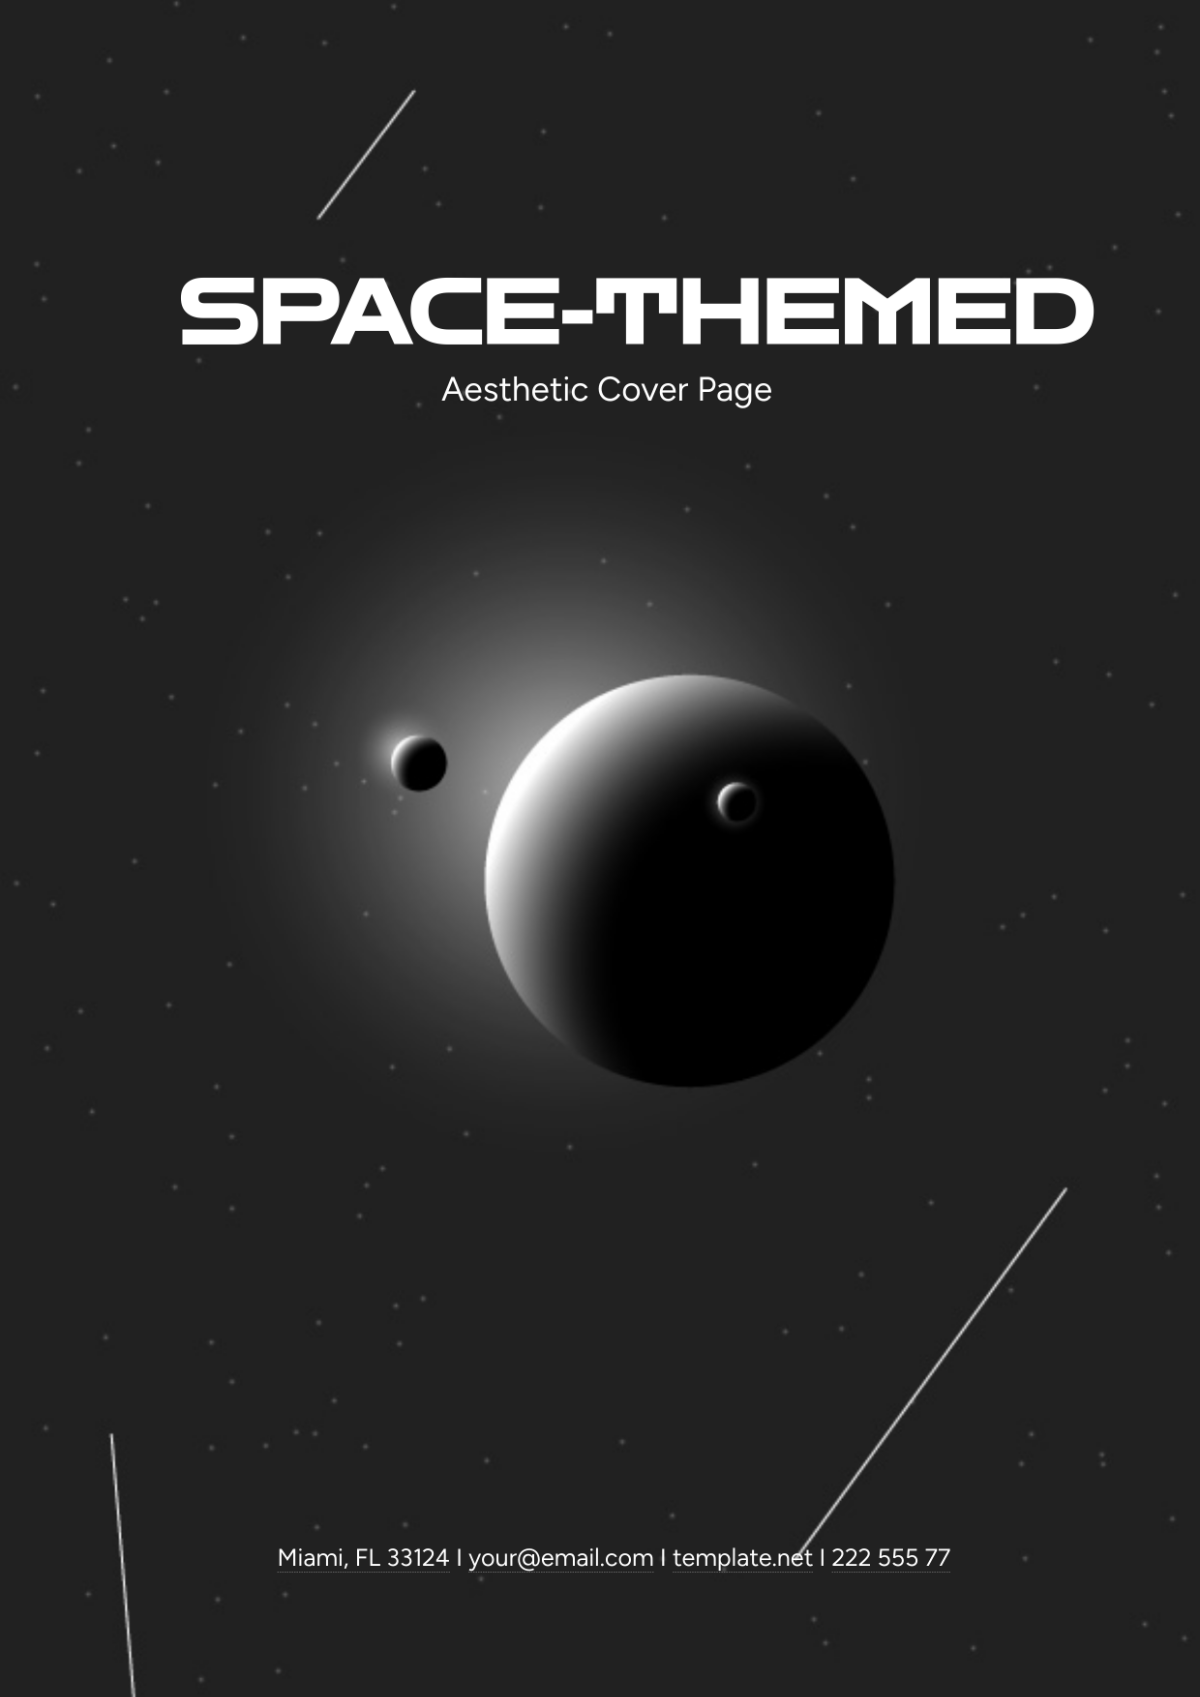 Space-themed Aesthetic Cover Page